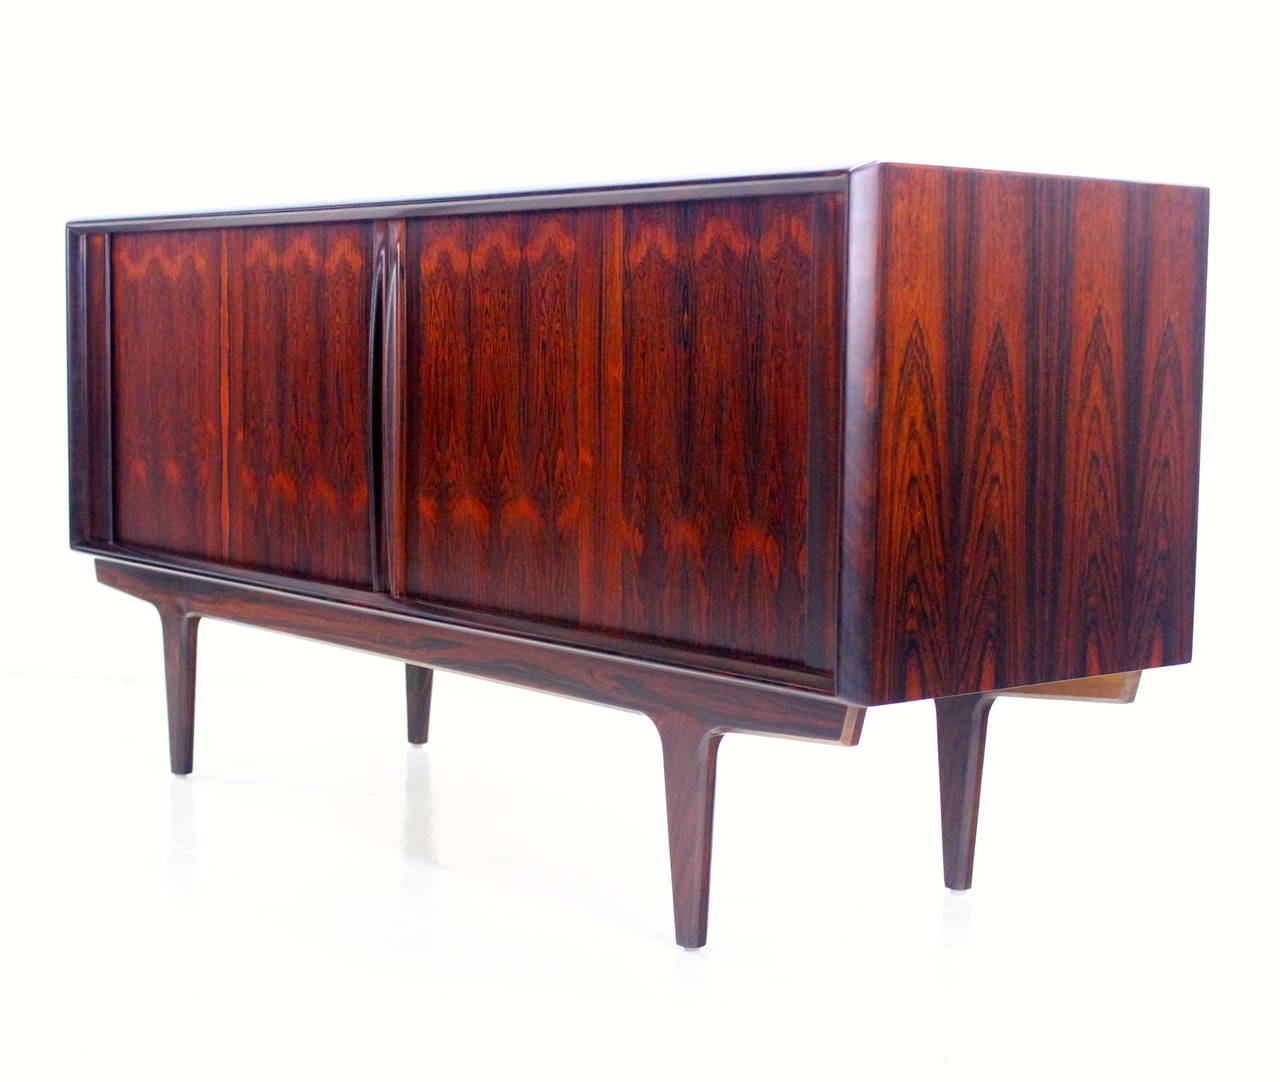 Elegant Danish modern credenza designed by Bernhard Pedersen & Son.
Superior style and craftsmanship.
Richly frame grained rosewood with sculptured handles.
Tambour doors glide open to adjustable shelves on each end.
Three drawers in the